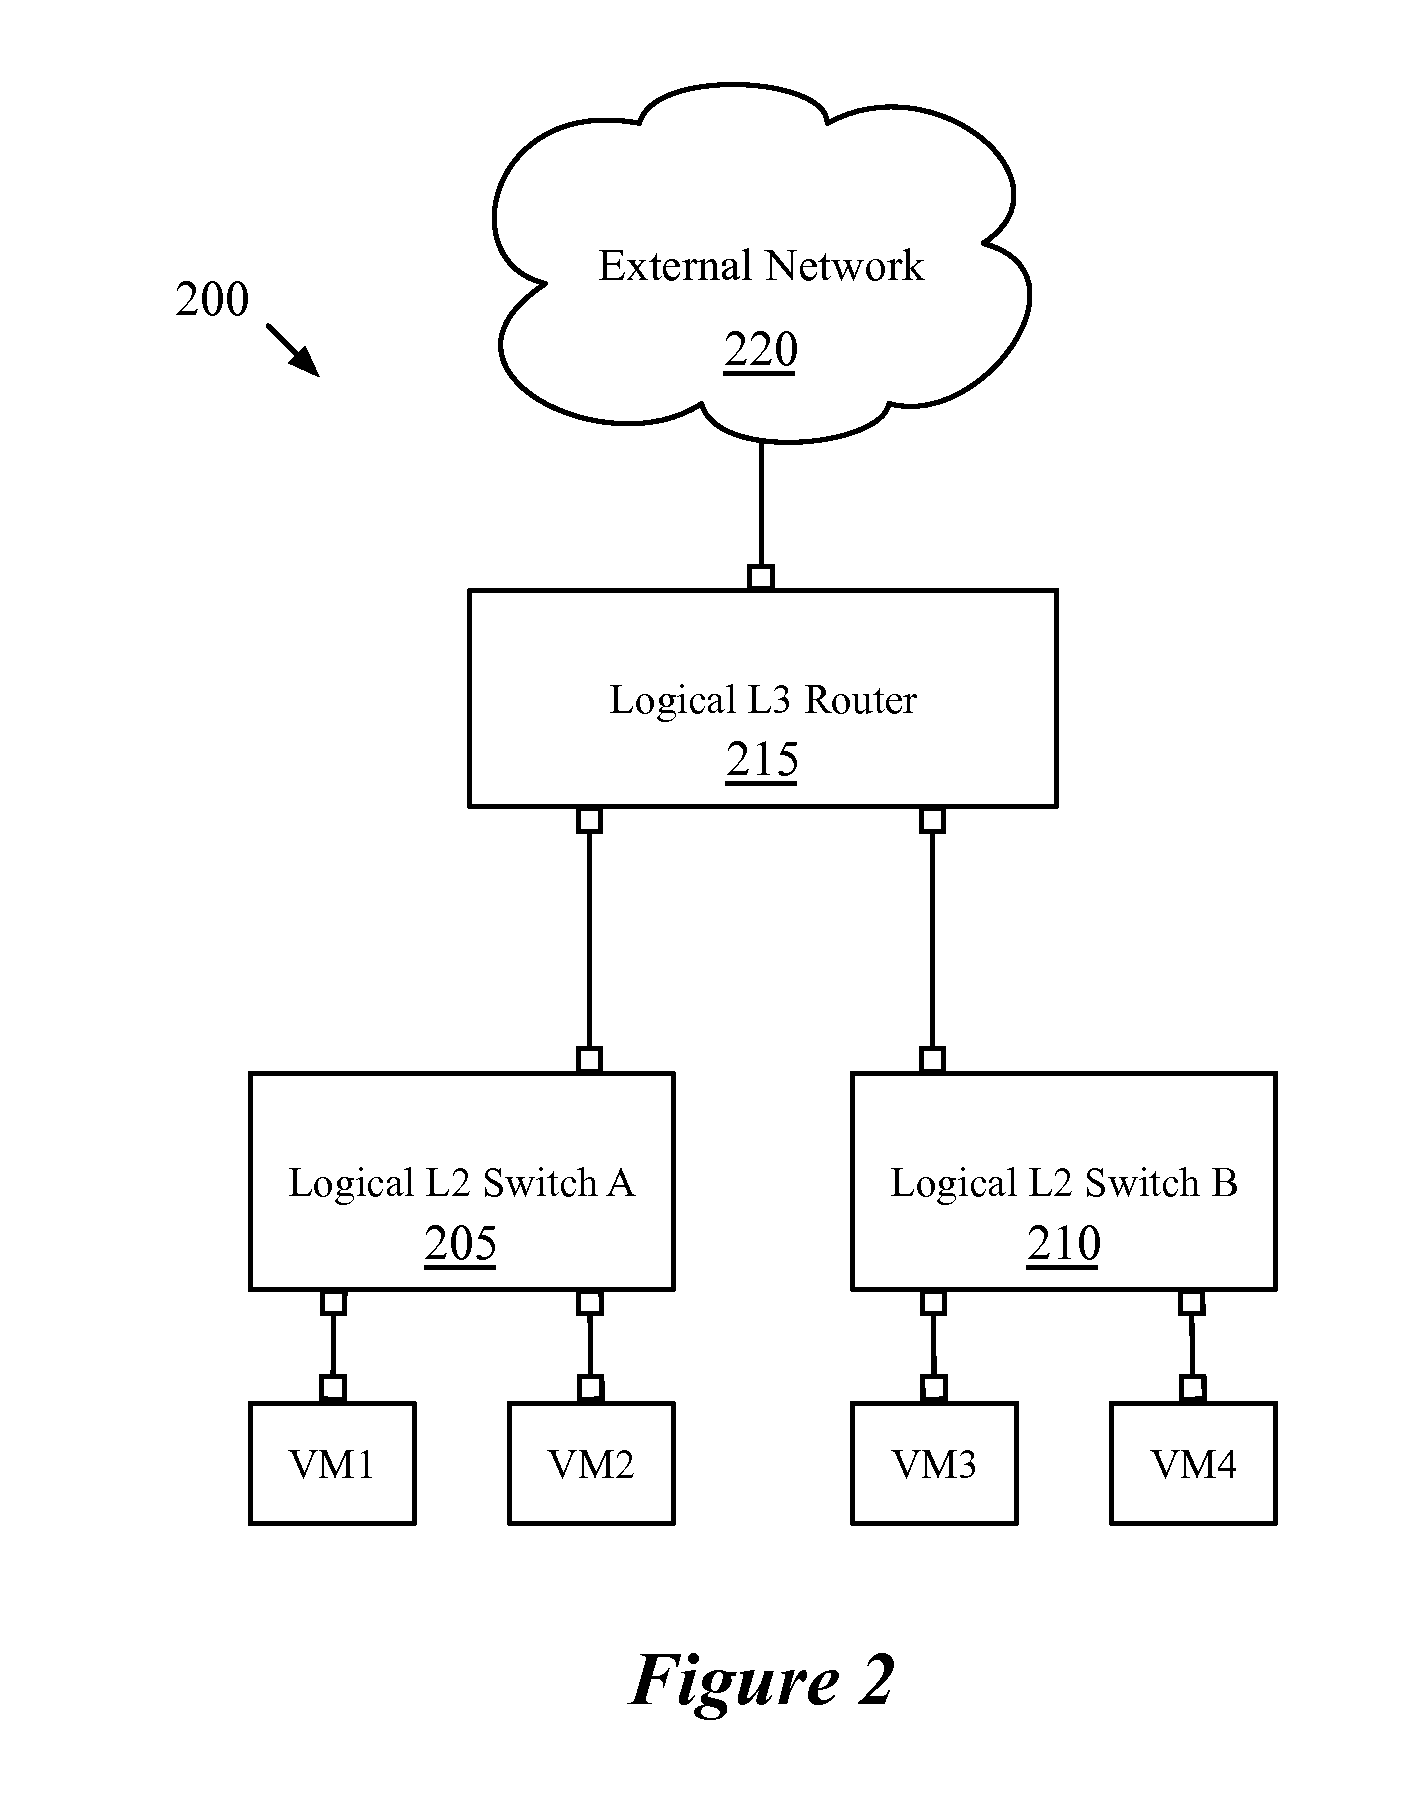 Logical Router Processing by Network Controller